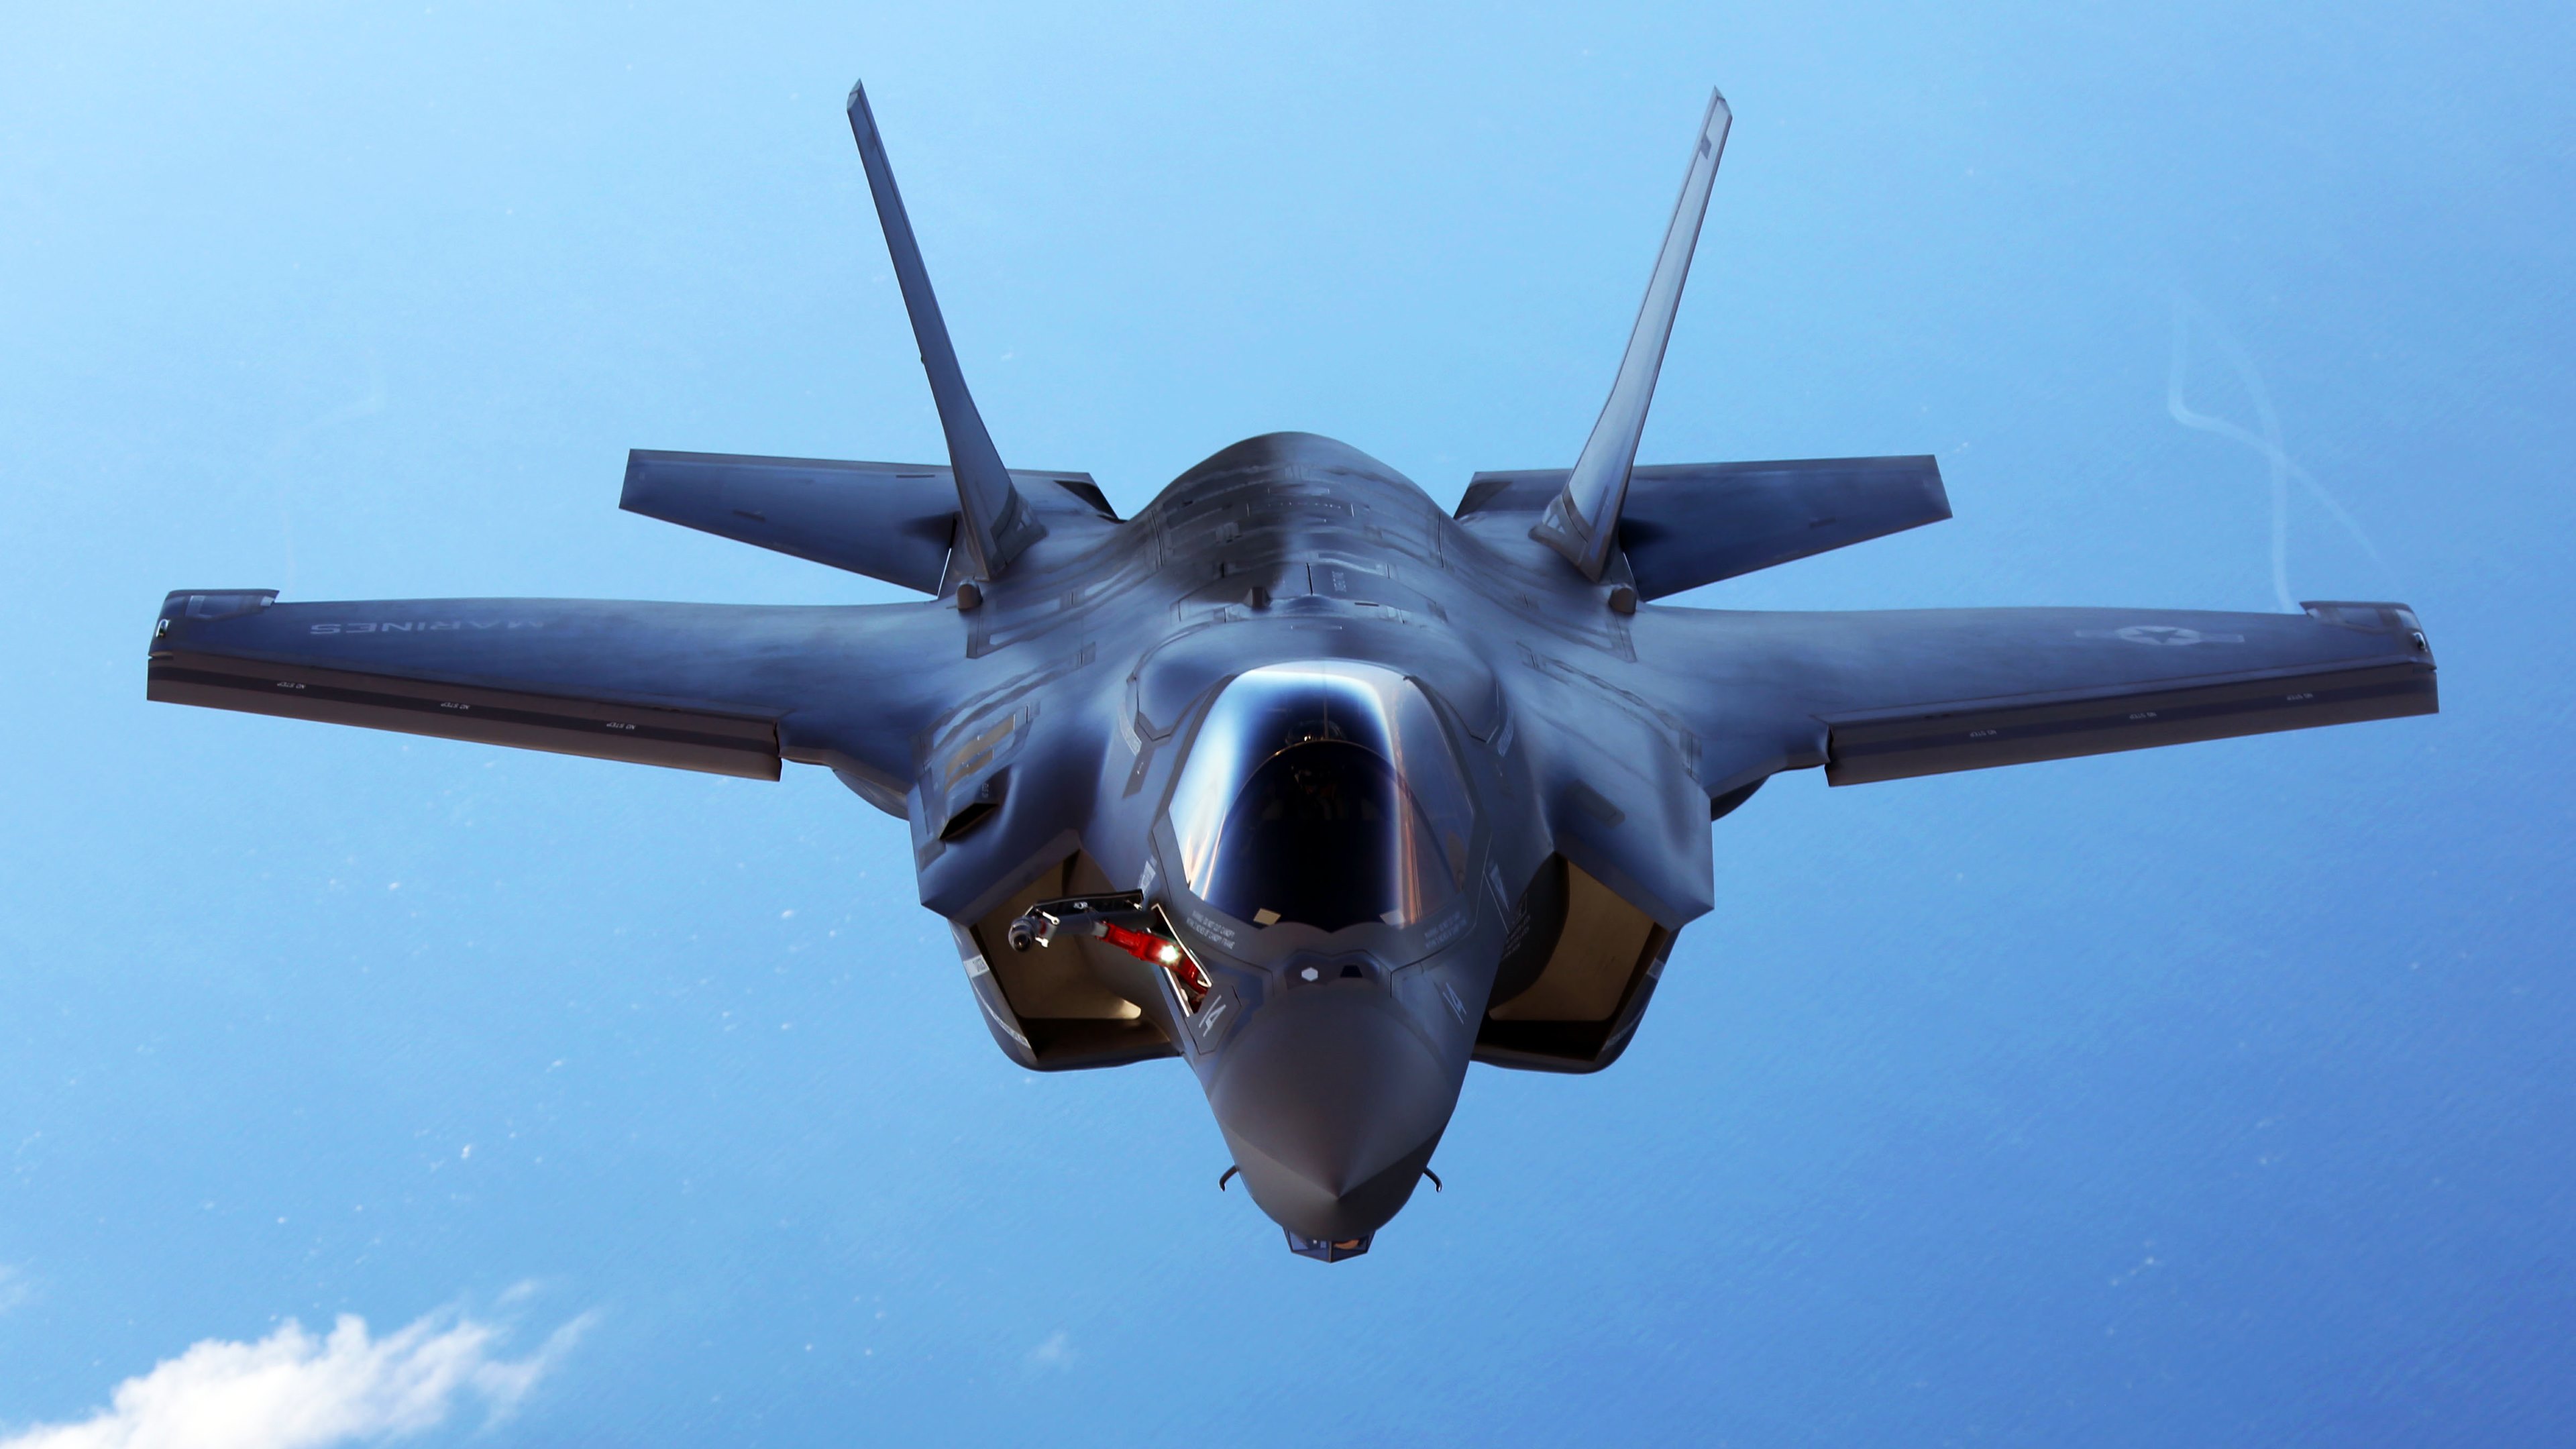 F35B Fighter Aircraft Wallpapers in HD, 4K and wide sizes